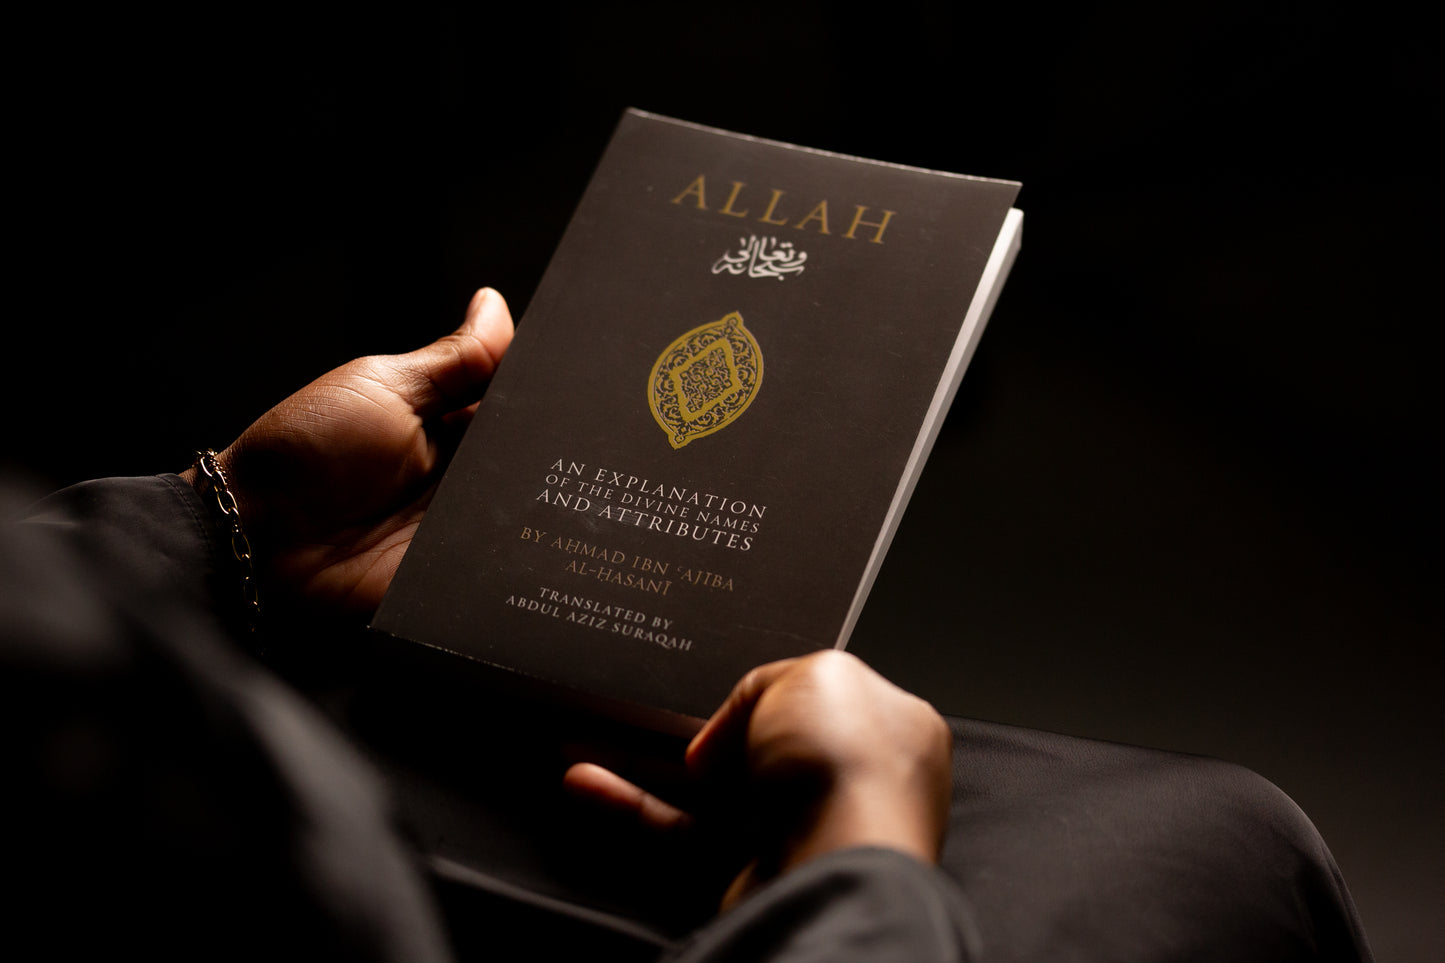 ALLAH: An Explanation Of The Divine Names And Attributes